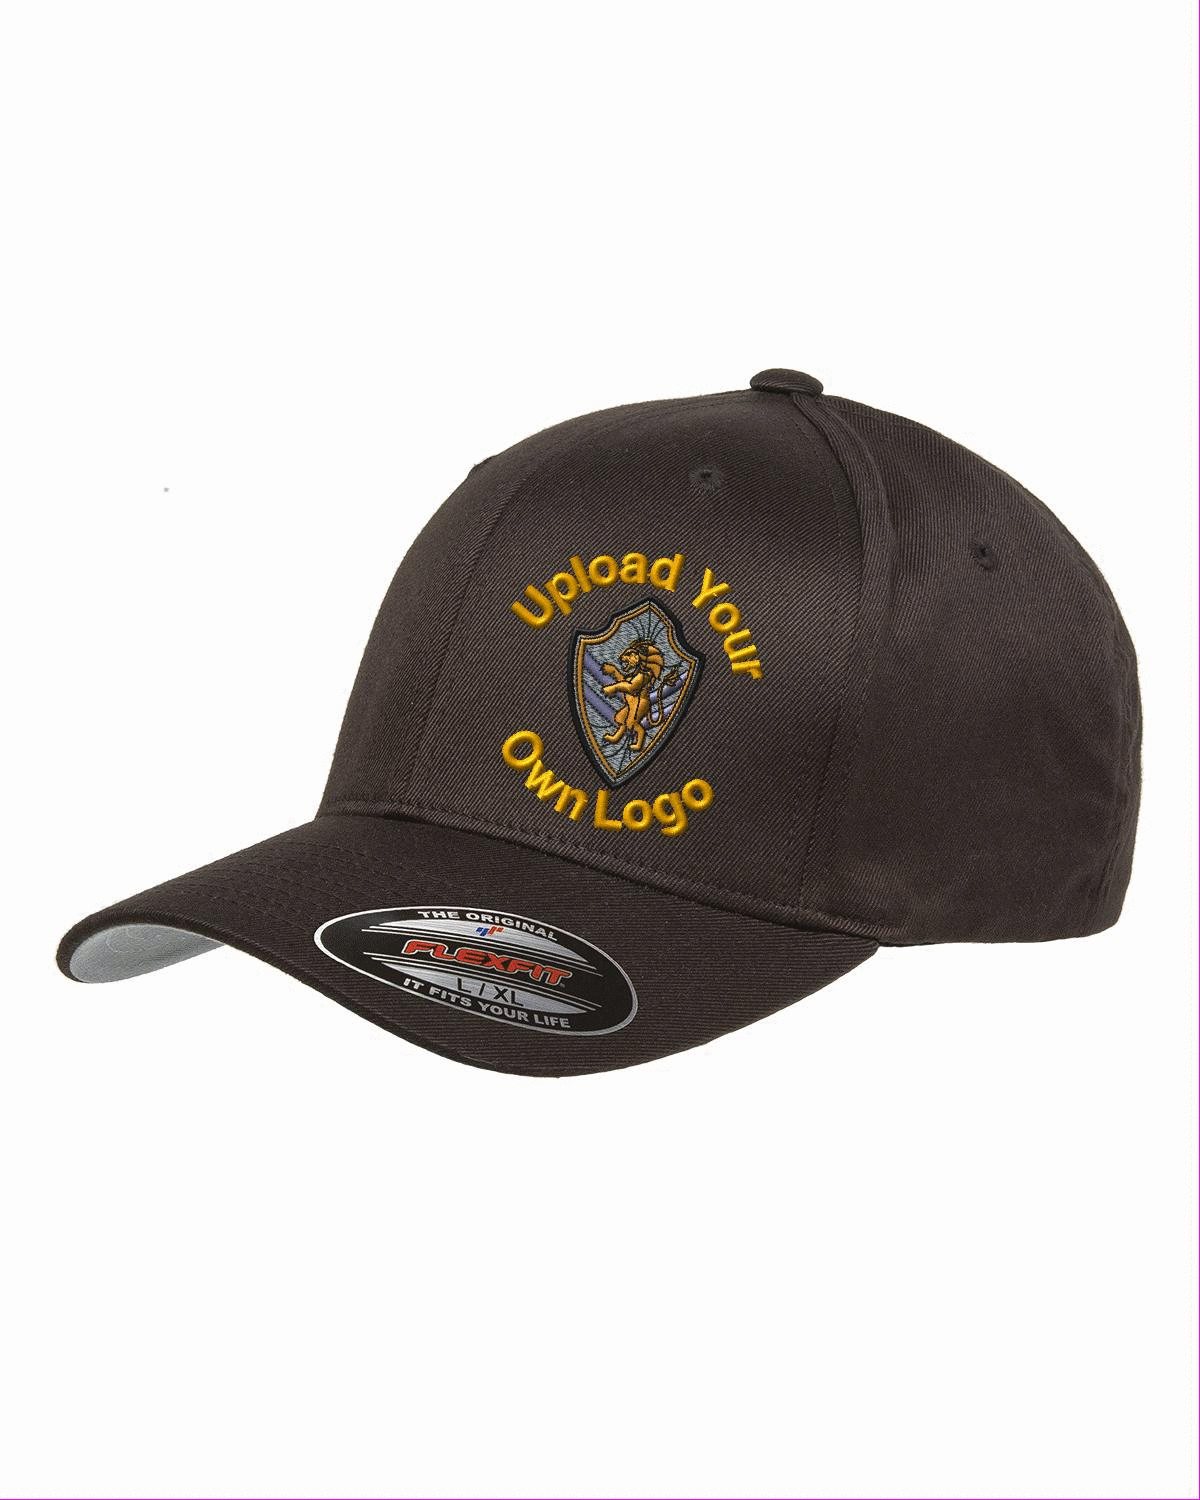 Flex Fitted Ball Cap with Your Company Logo Embroidered - brown